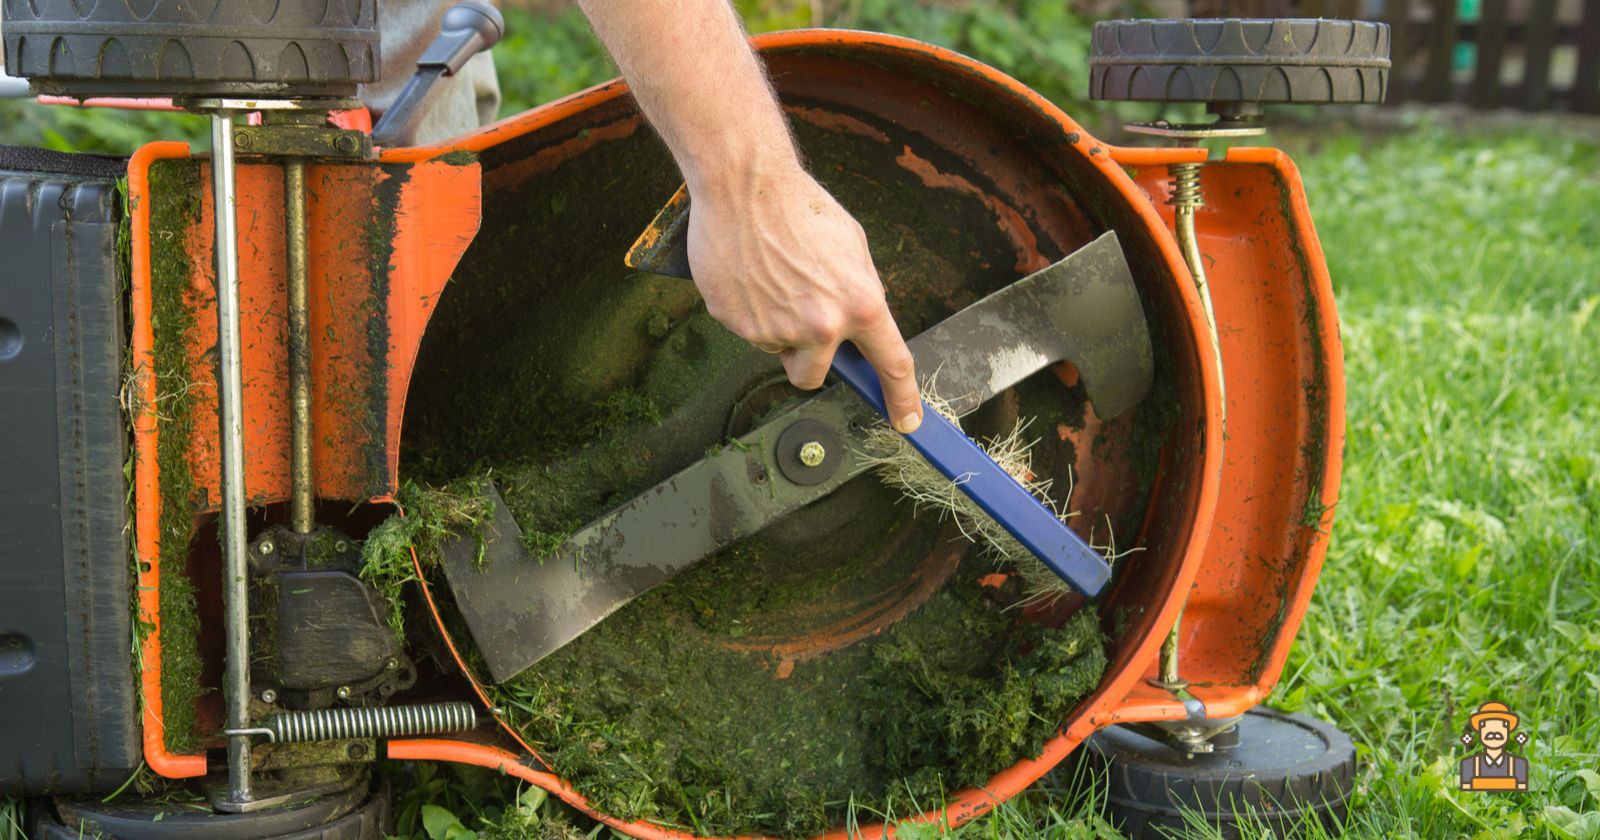 How to Sharpen Lawn Mower Blades Without Removing